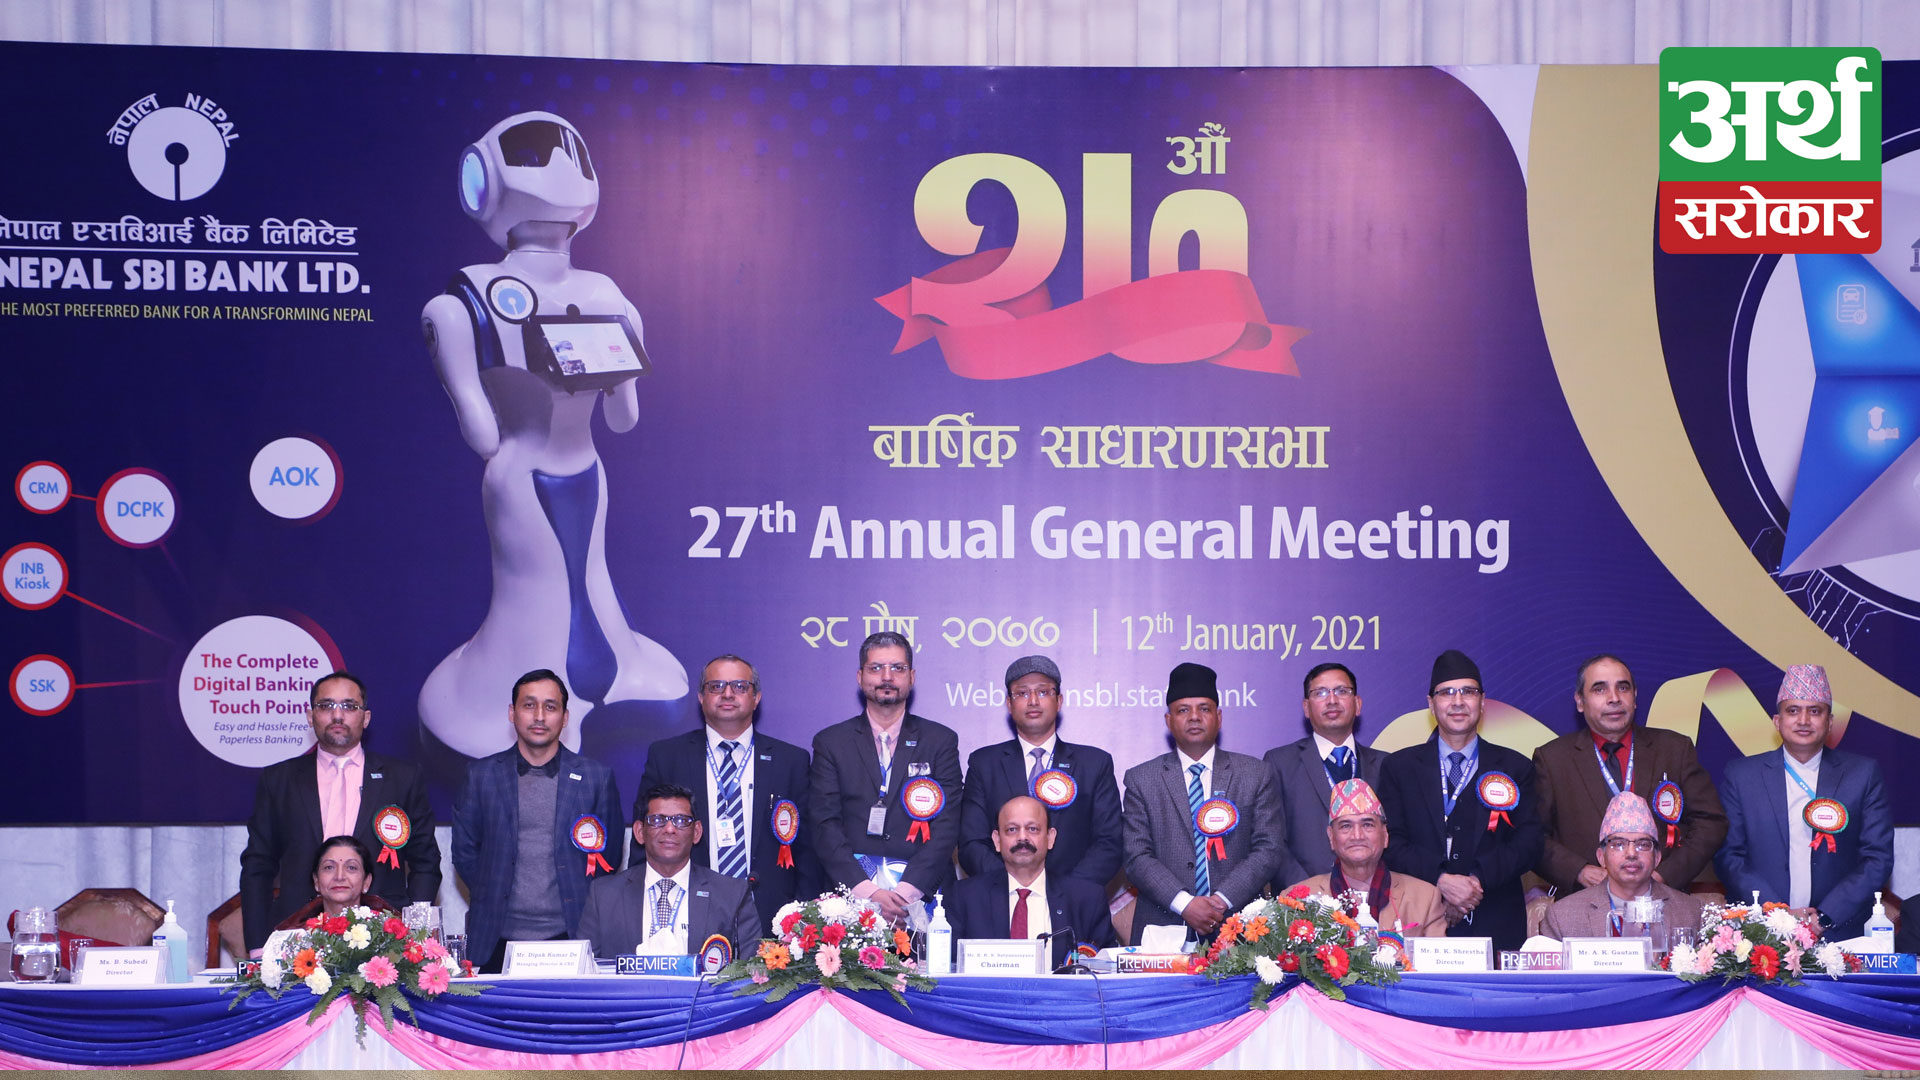 Nepal SBI Bank has successfully completed its 27th Annual General Meeting